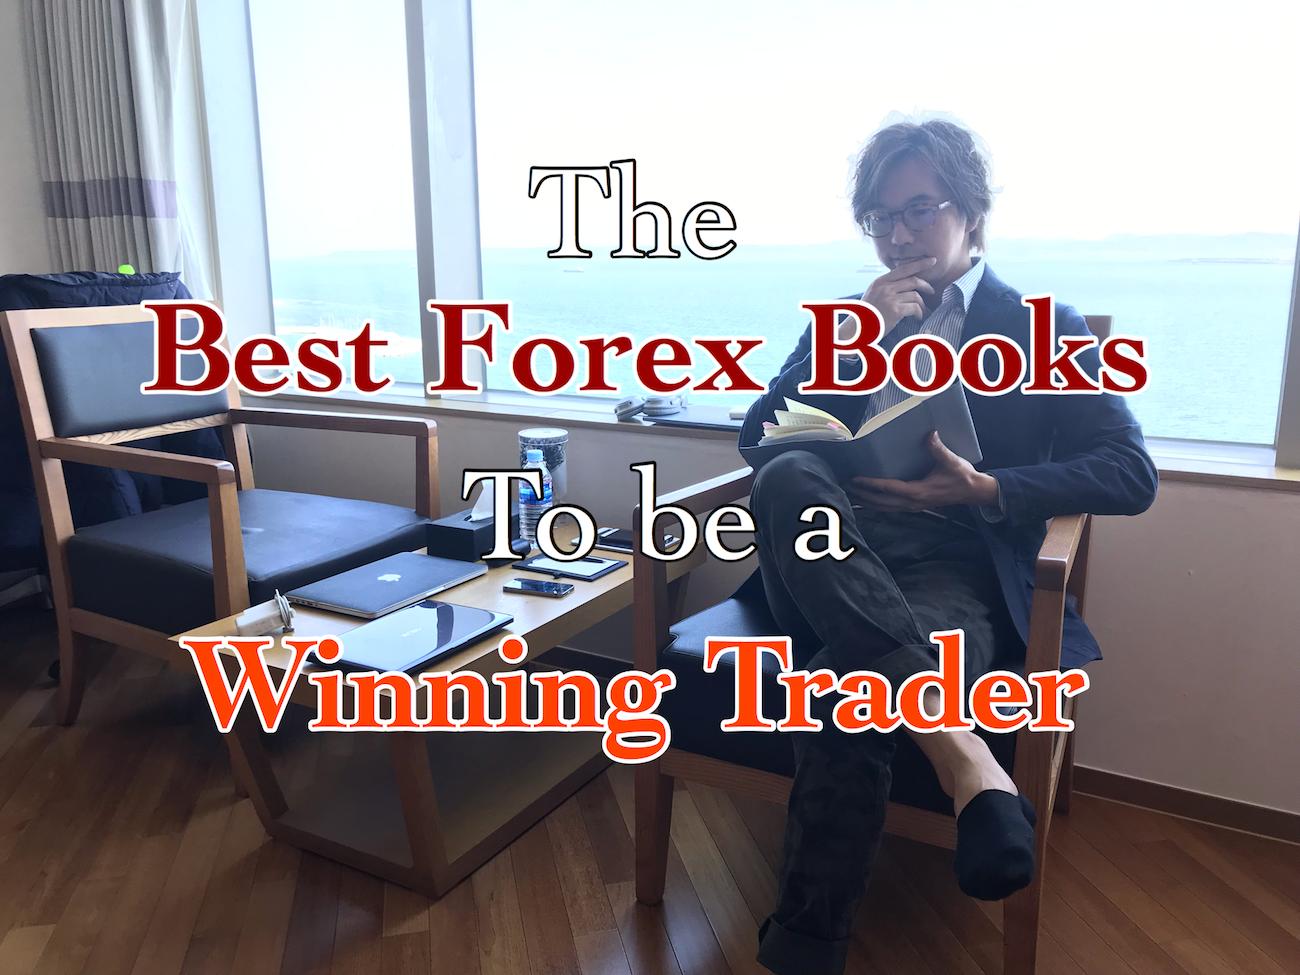 The Best Forex Books you must read to be a Winning Trader